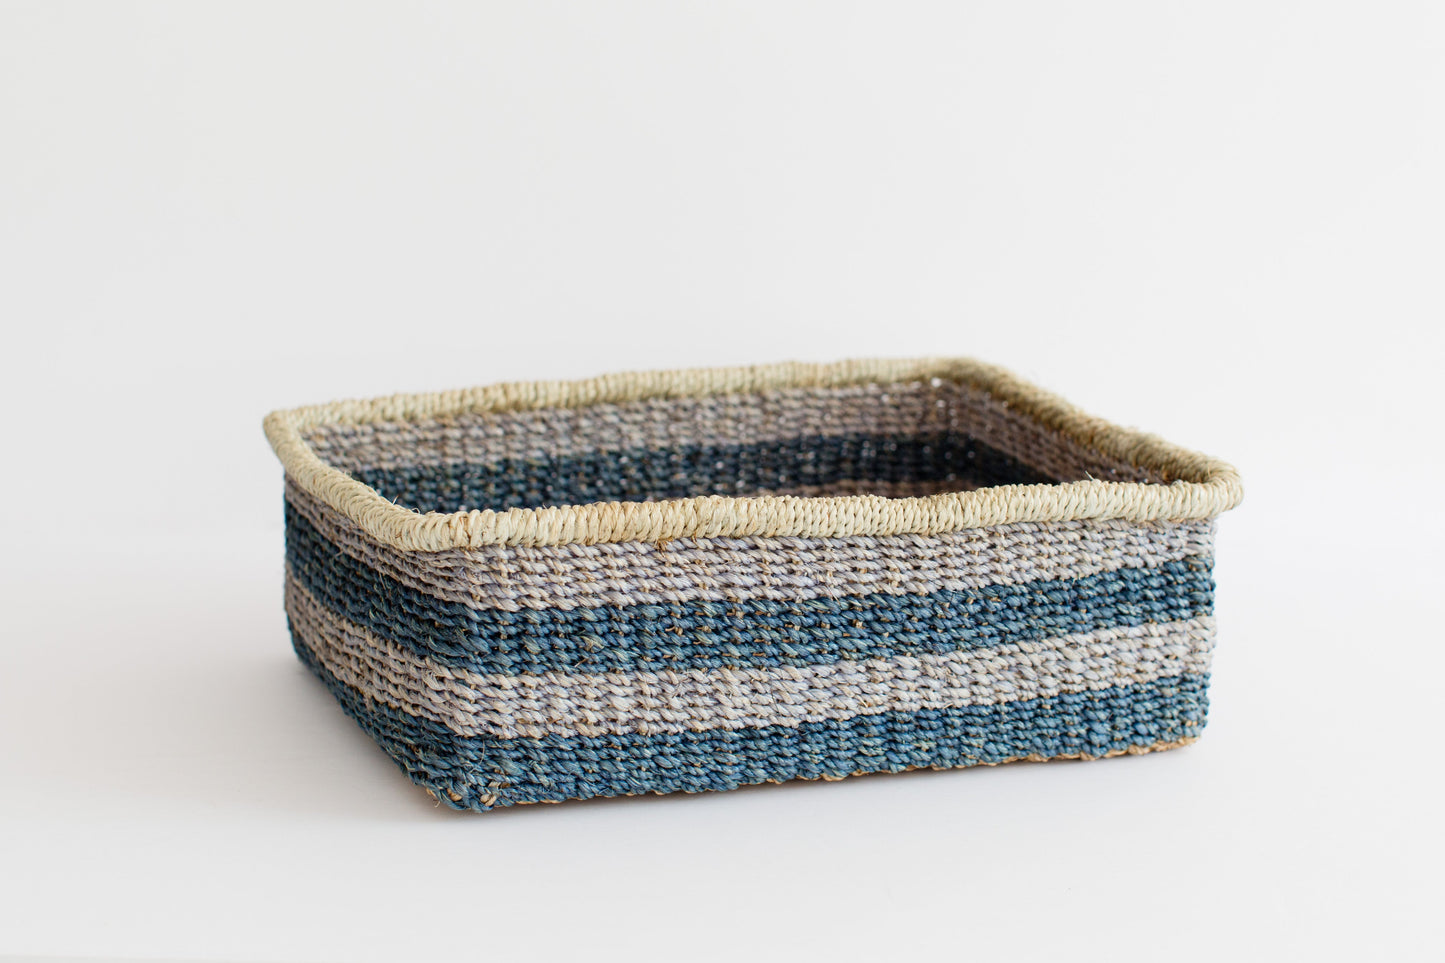 Woven Catchall Storage Tray in Blue Stripes